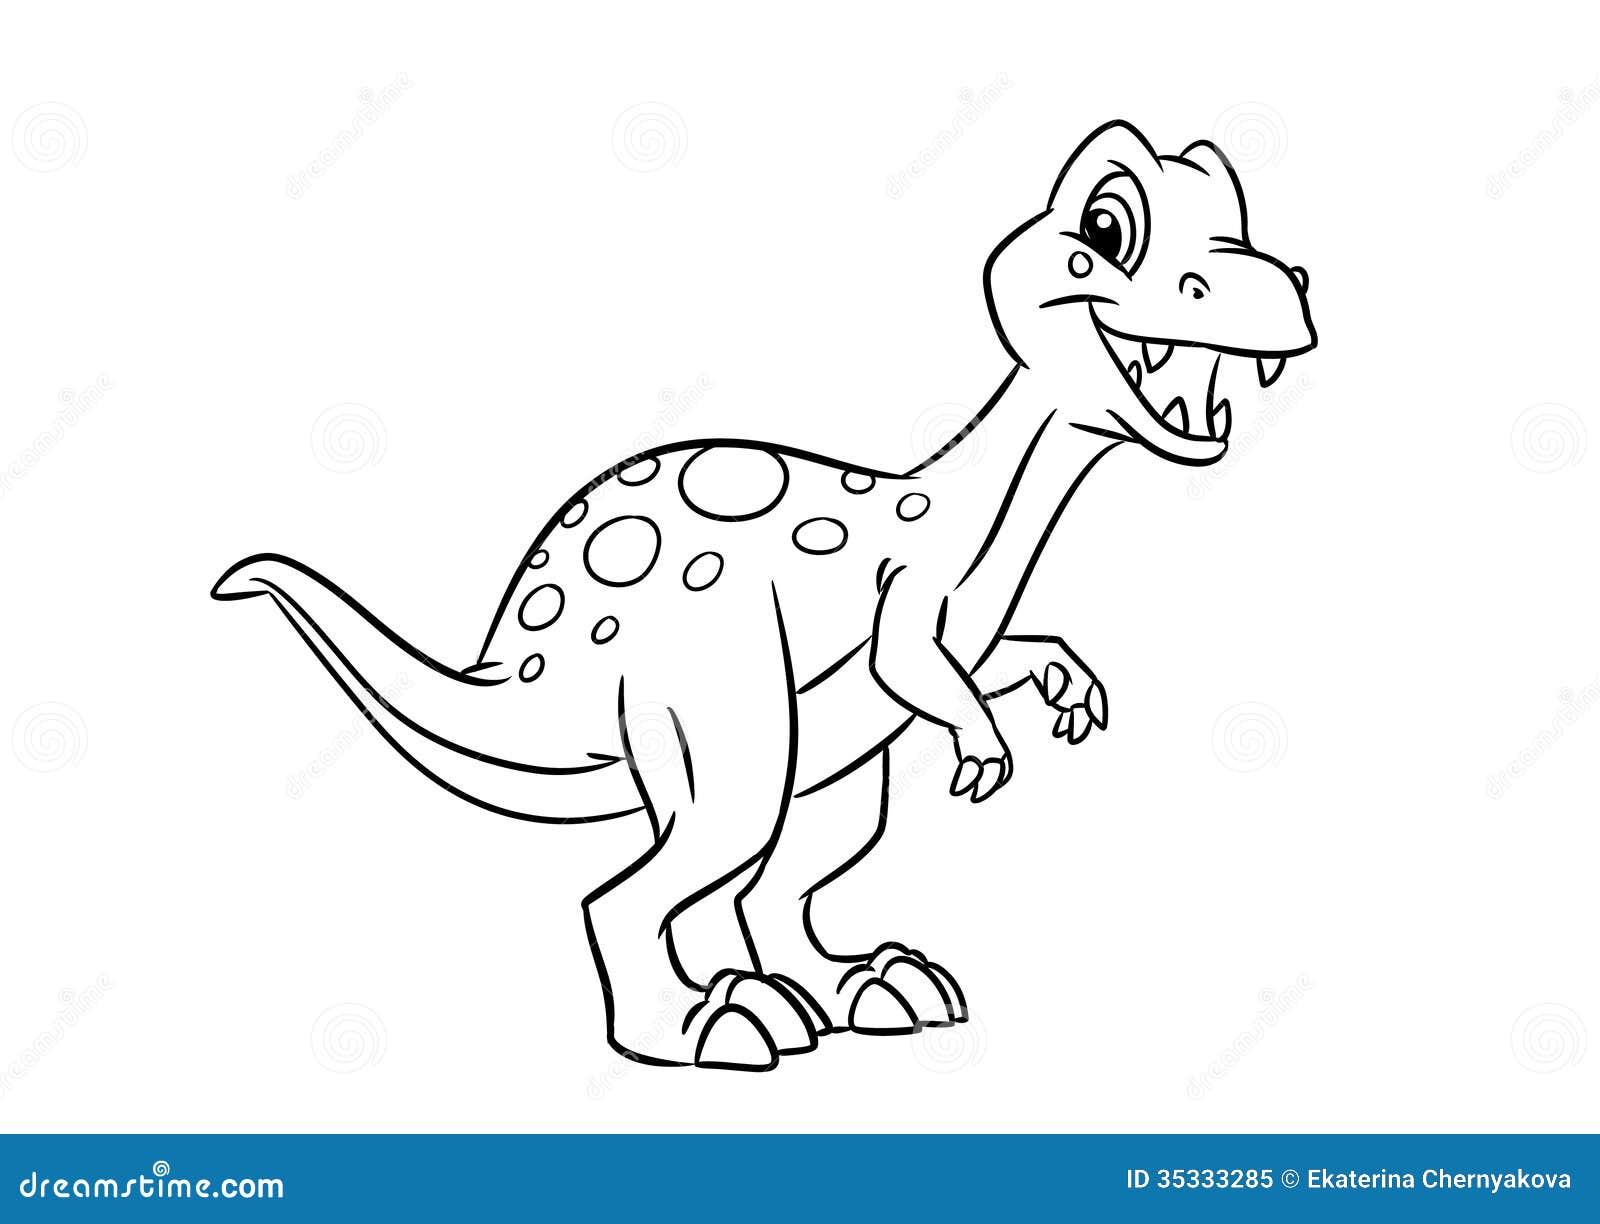 Dinosaur Coloring Pages Stock Illustrations – 20 Dinosaur ...